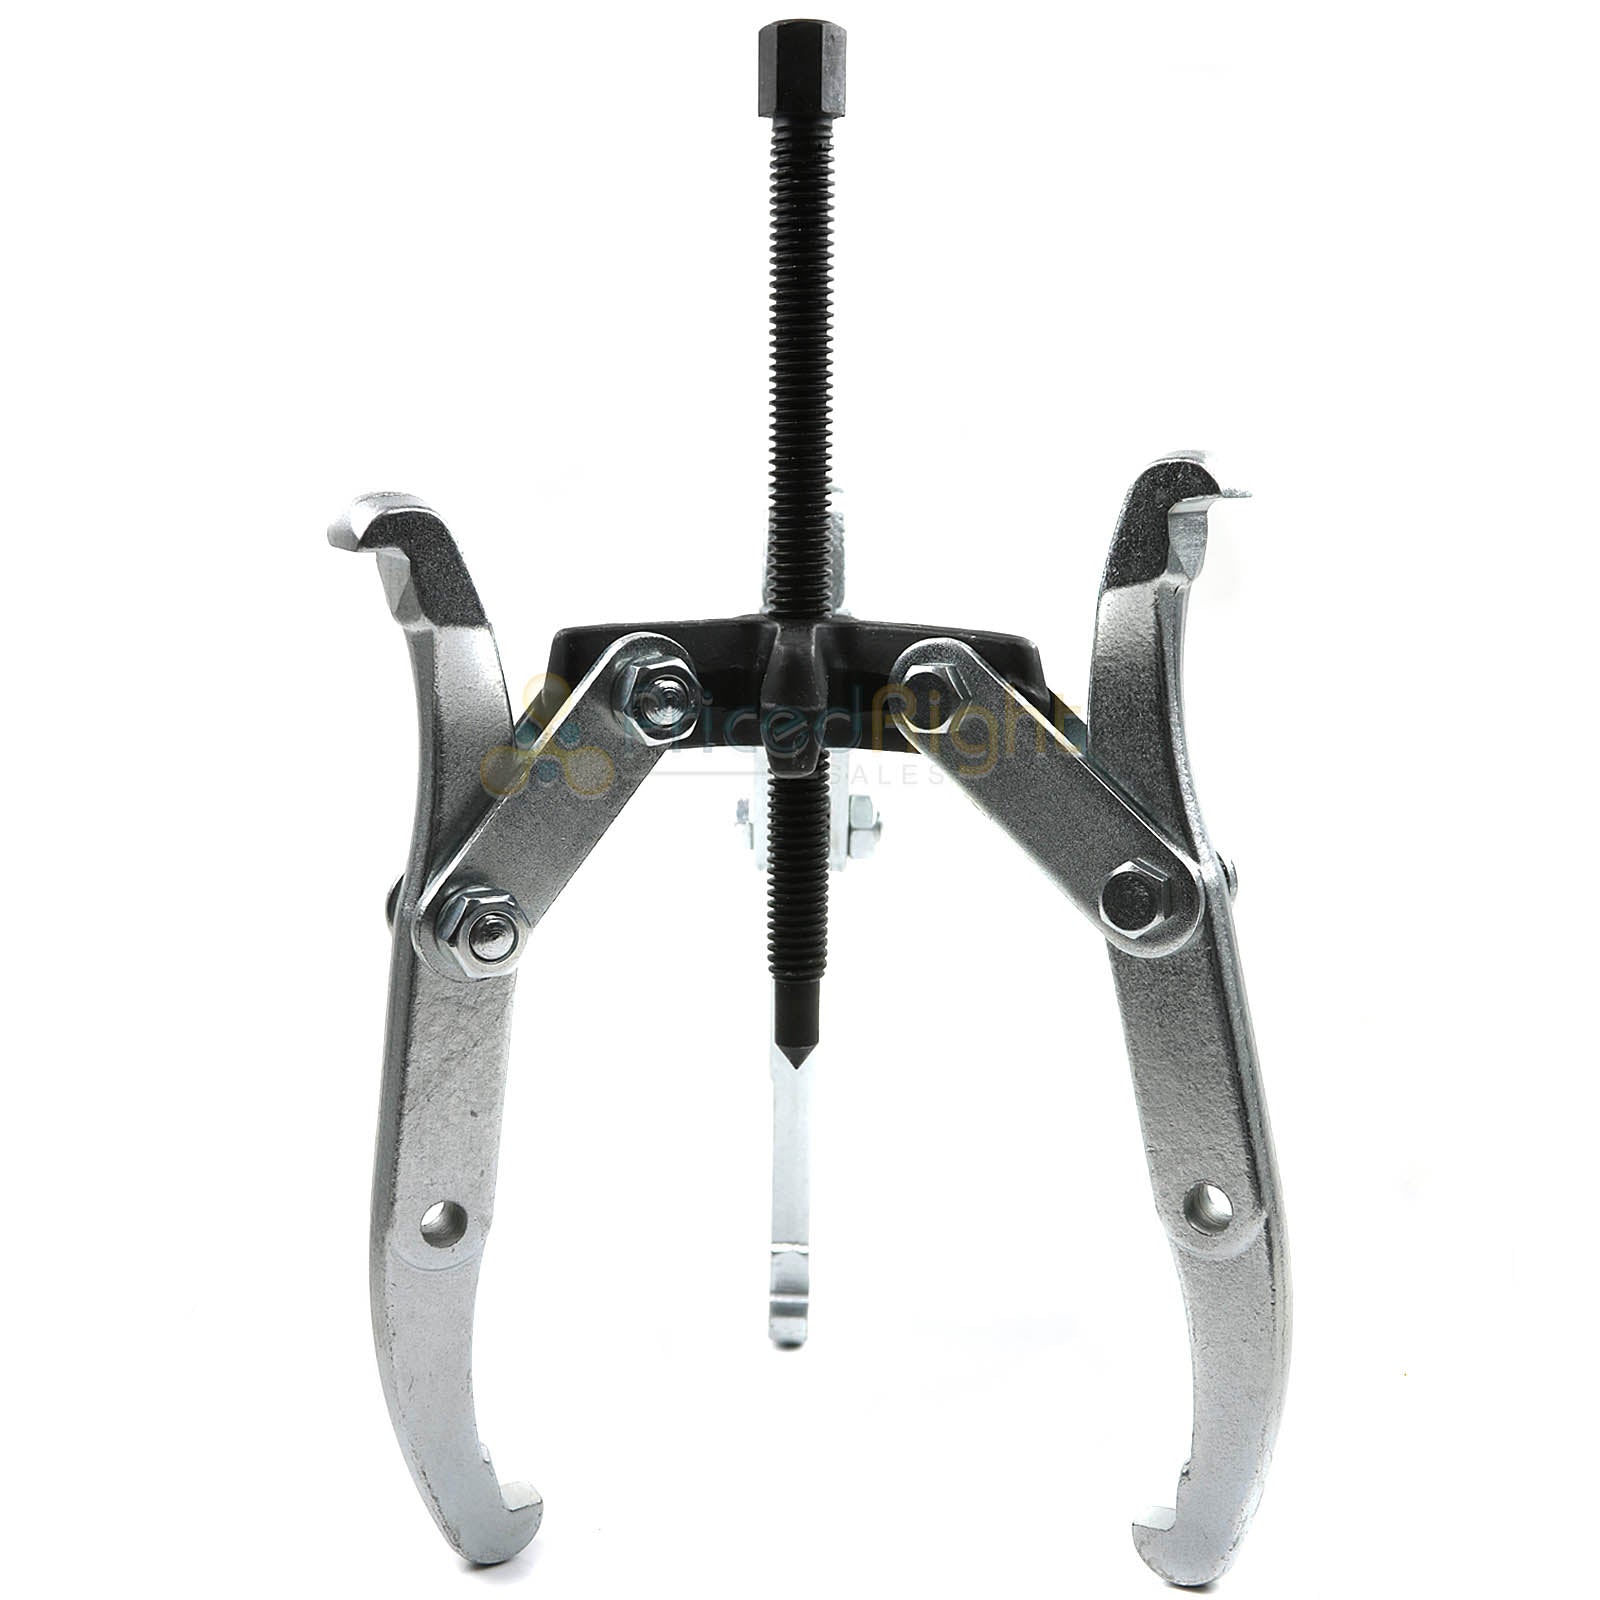 8 Inch Gear Puller Adjustable Combination 2 & 3 Jaw Reversible 6 Ton Capacity